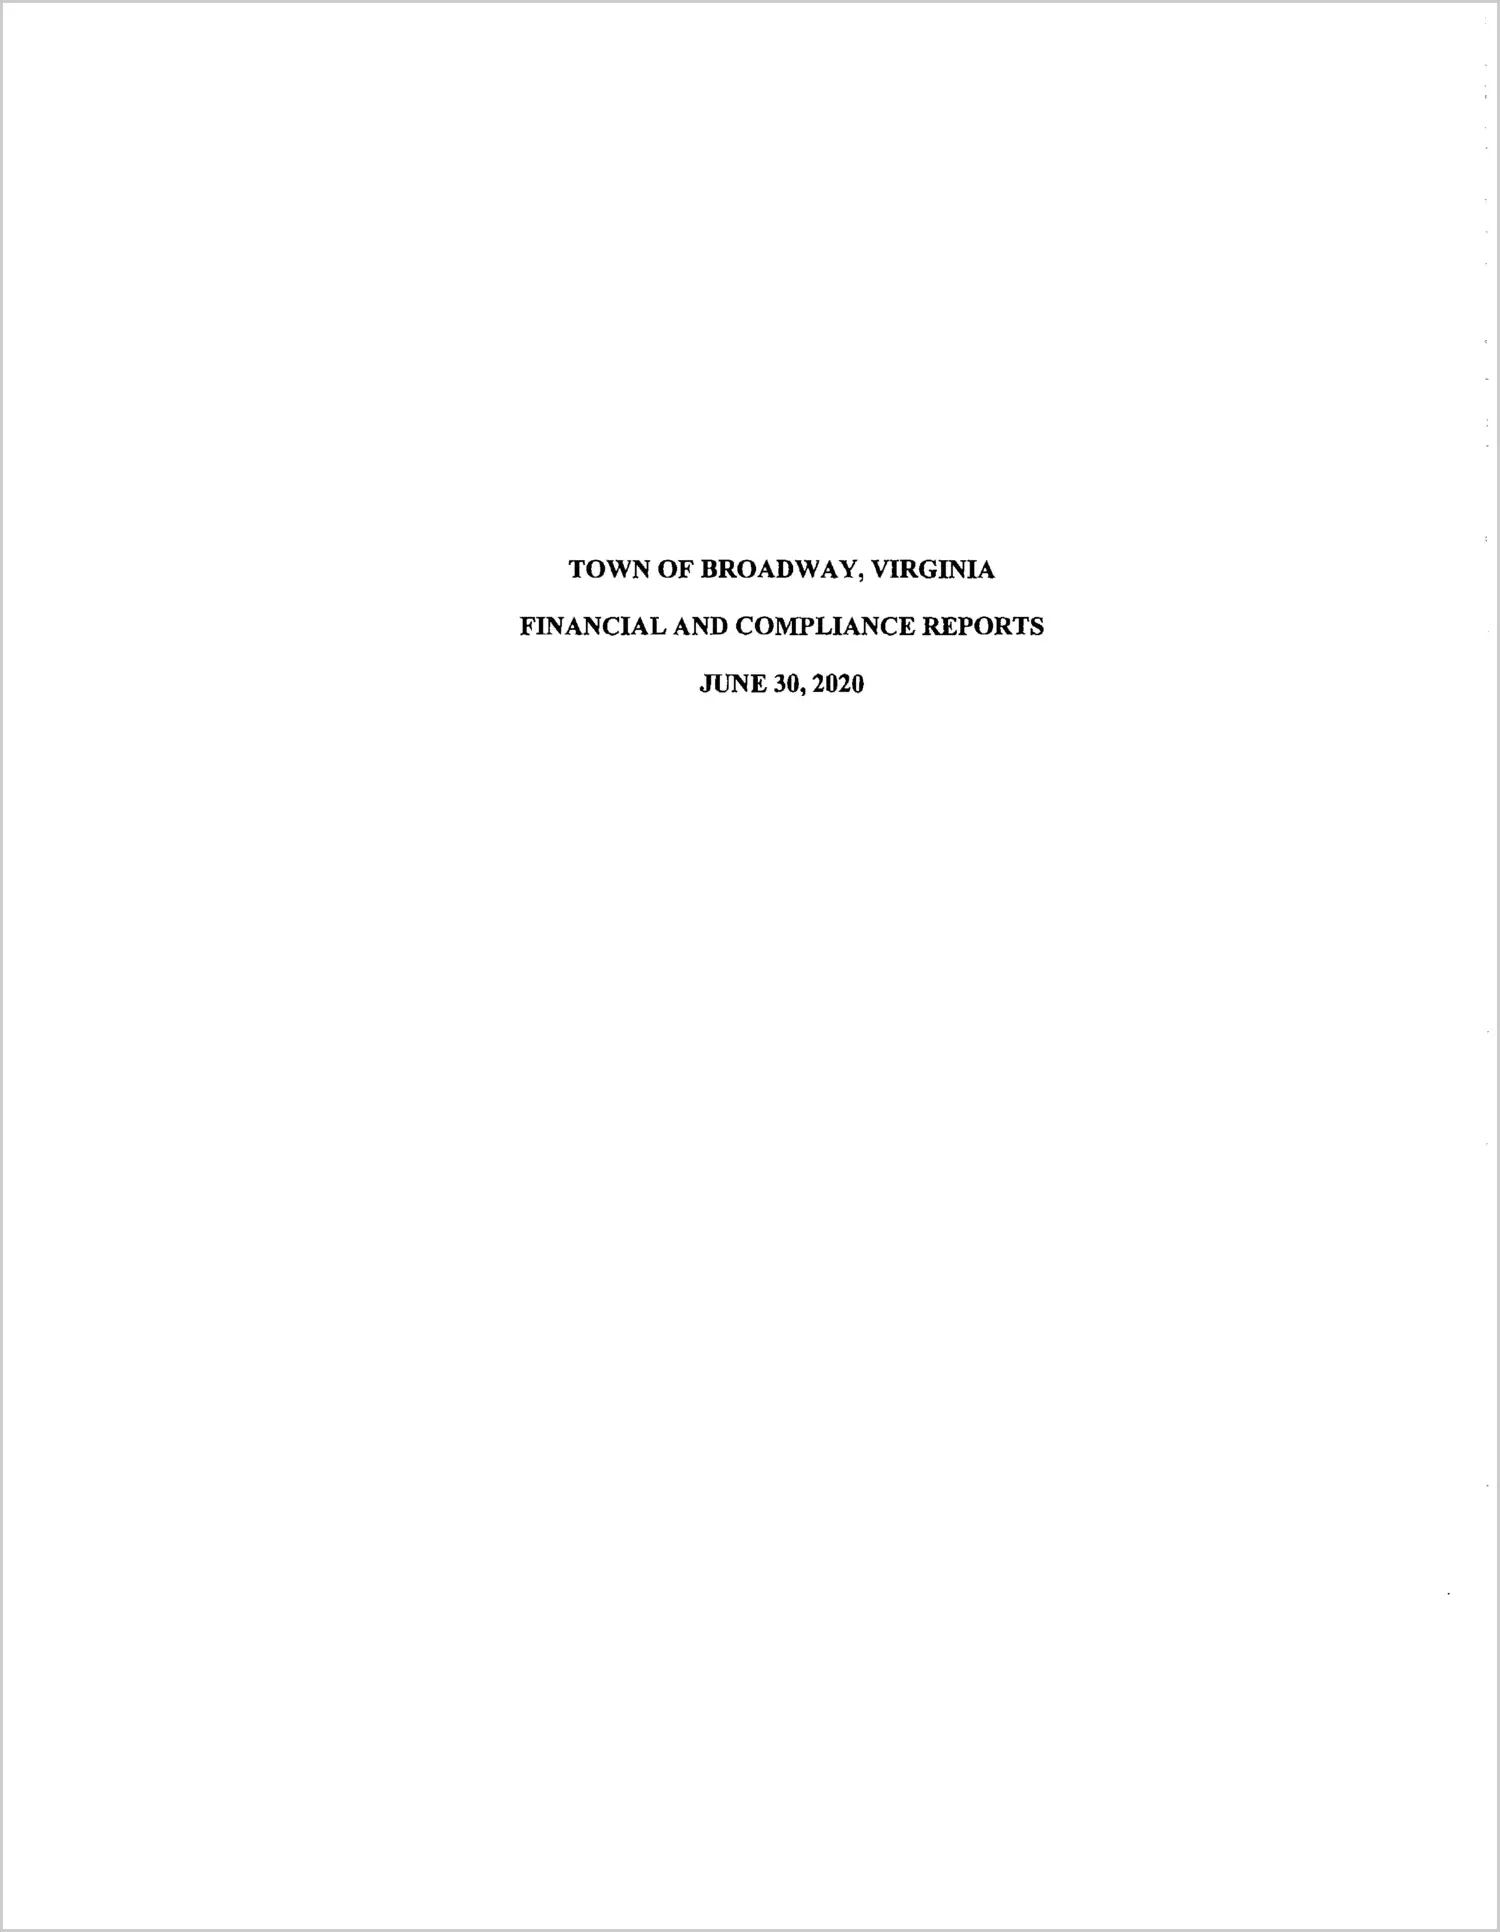 2020 Annual Financial Report for Town of Broadway